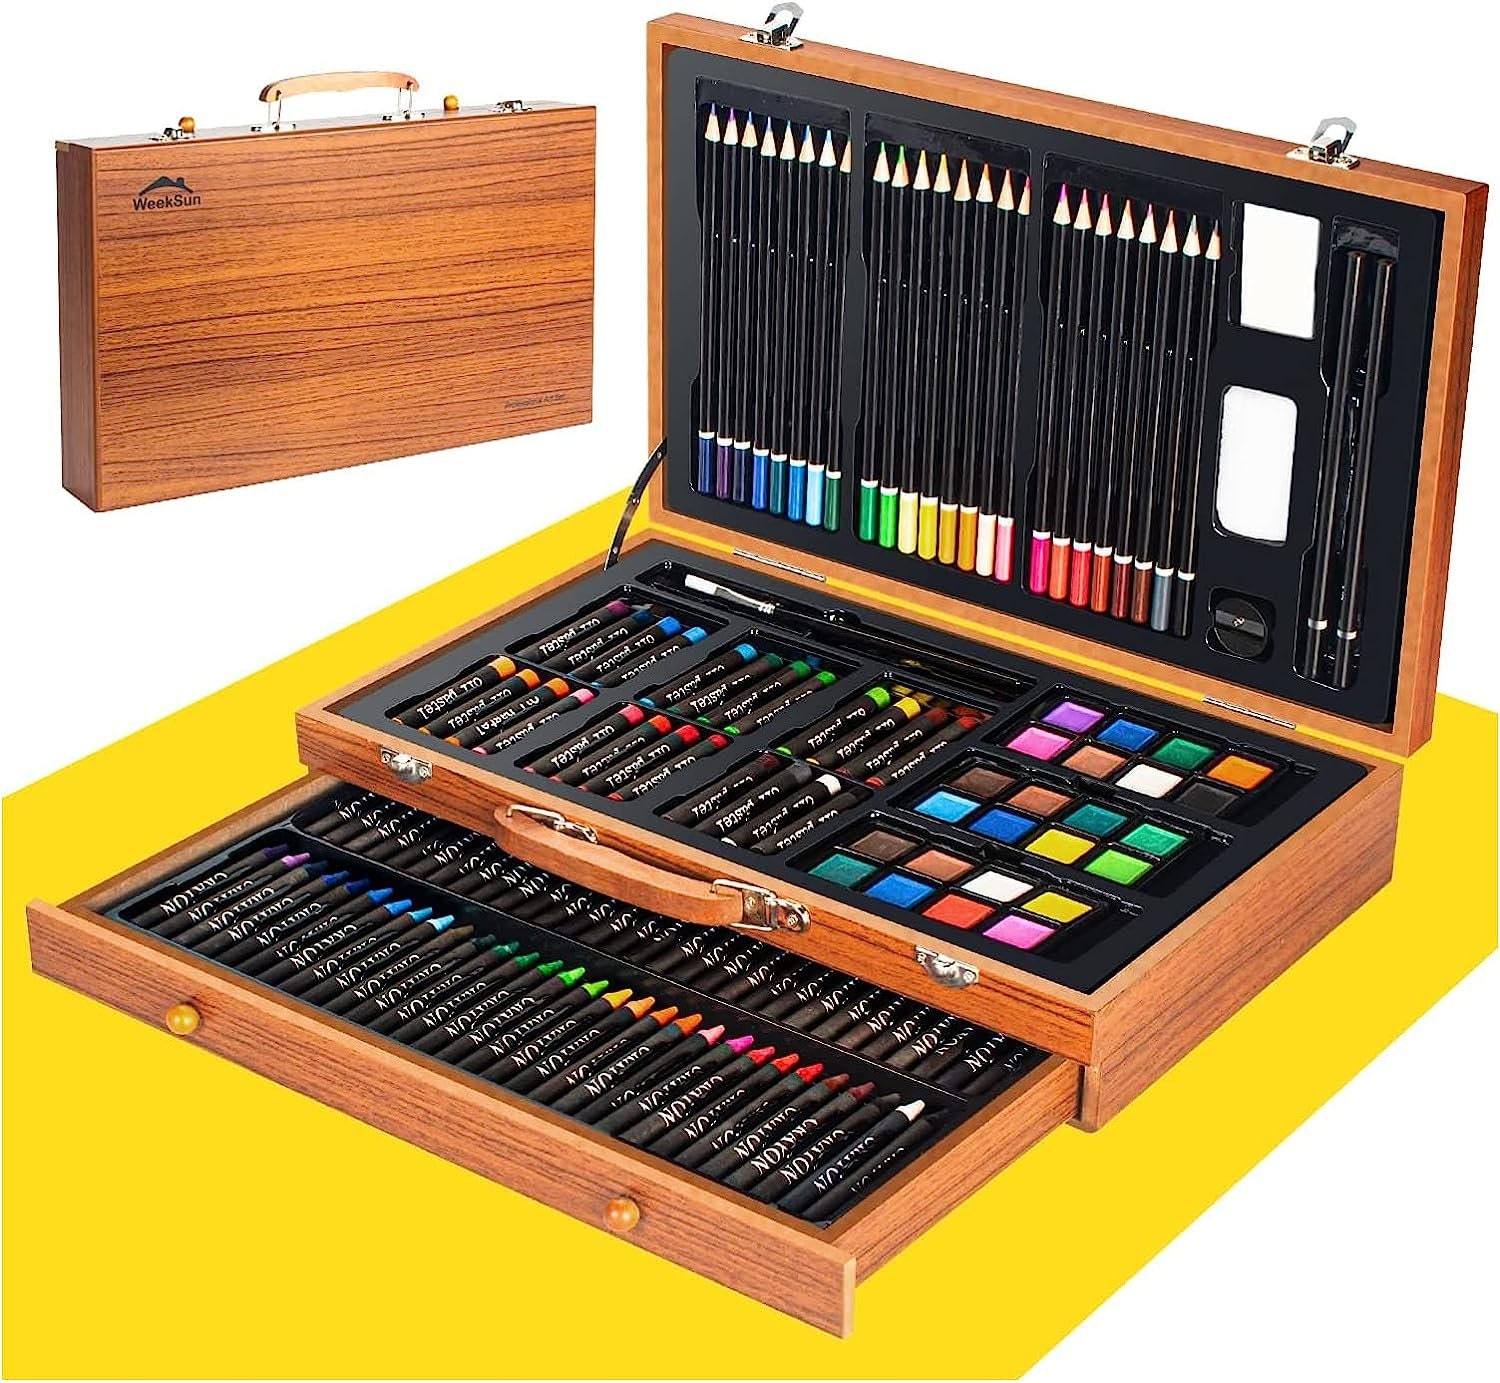  Art Supplies, 241 PCS Drawing Art Kit for Kids Boys Girls,  Deluxe Art and Craft Set with Double Sided Trifold Easel, Markers, Oil  Pastels, Crayons, Colour Pencils. Gift for Artist, Beginners